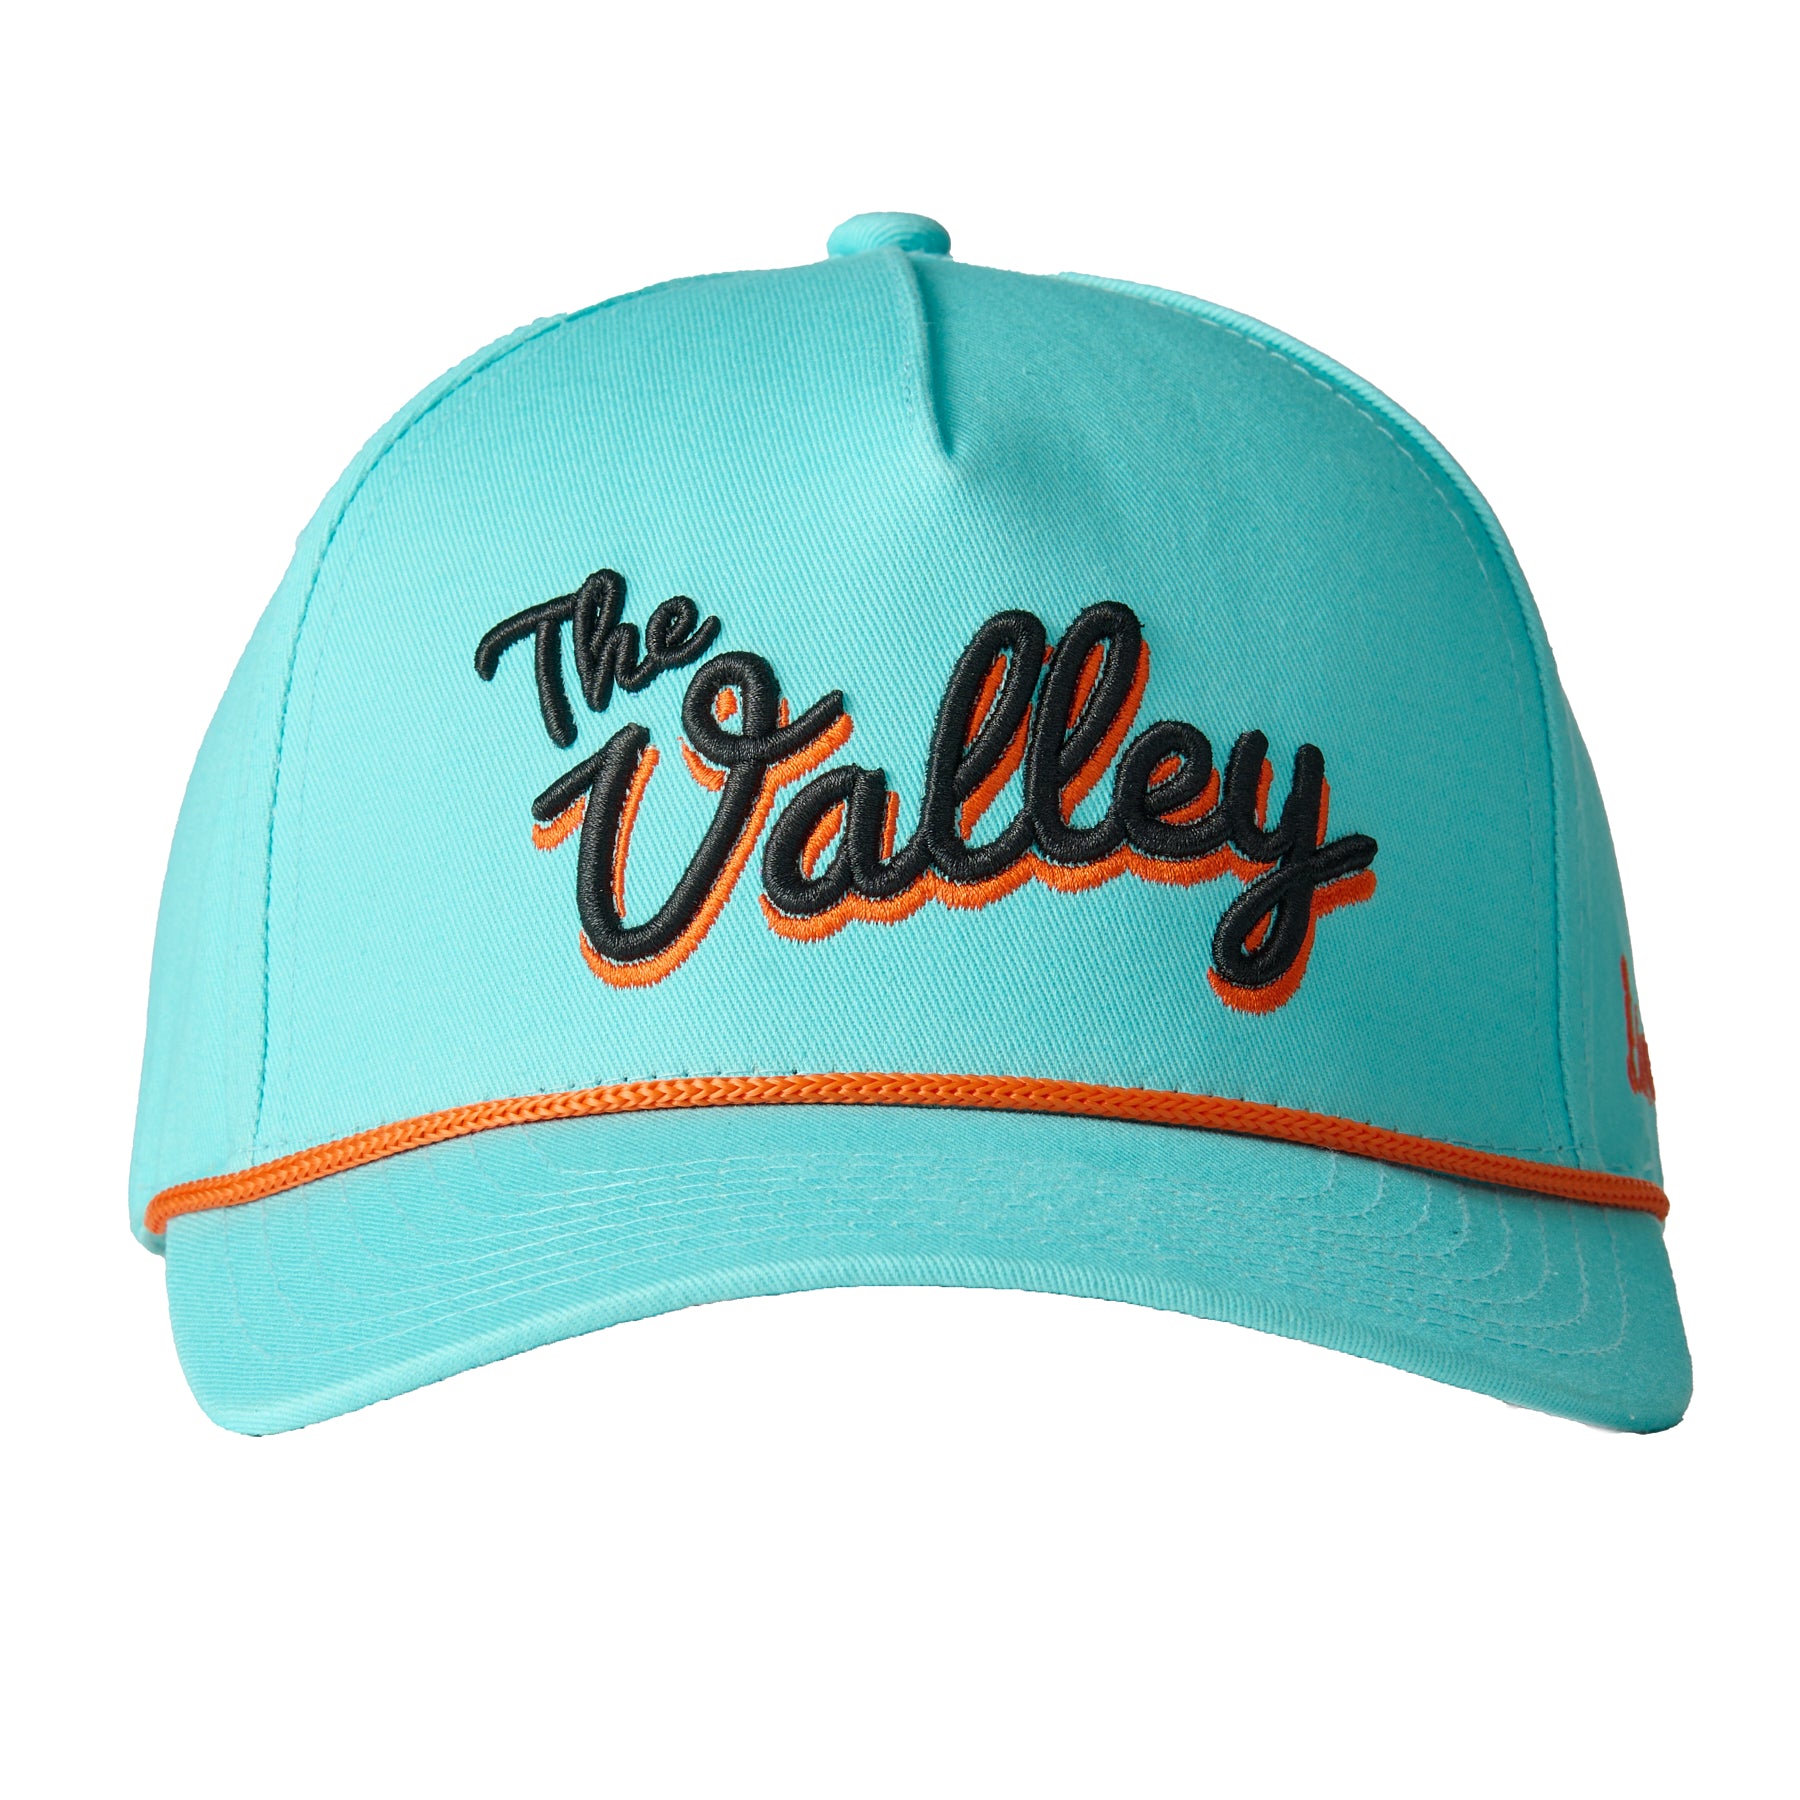 The Valley (Turquoise)